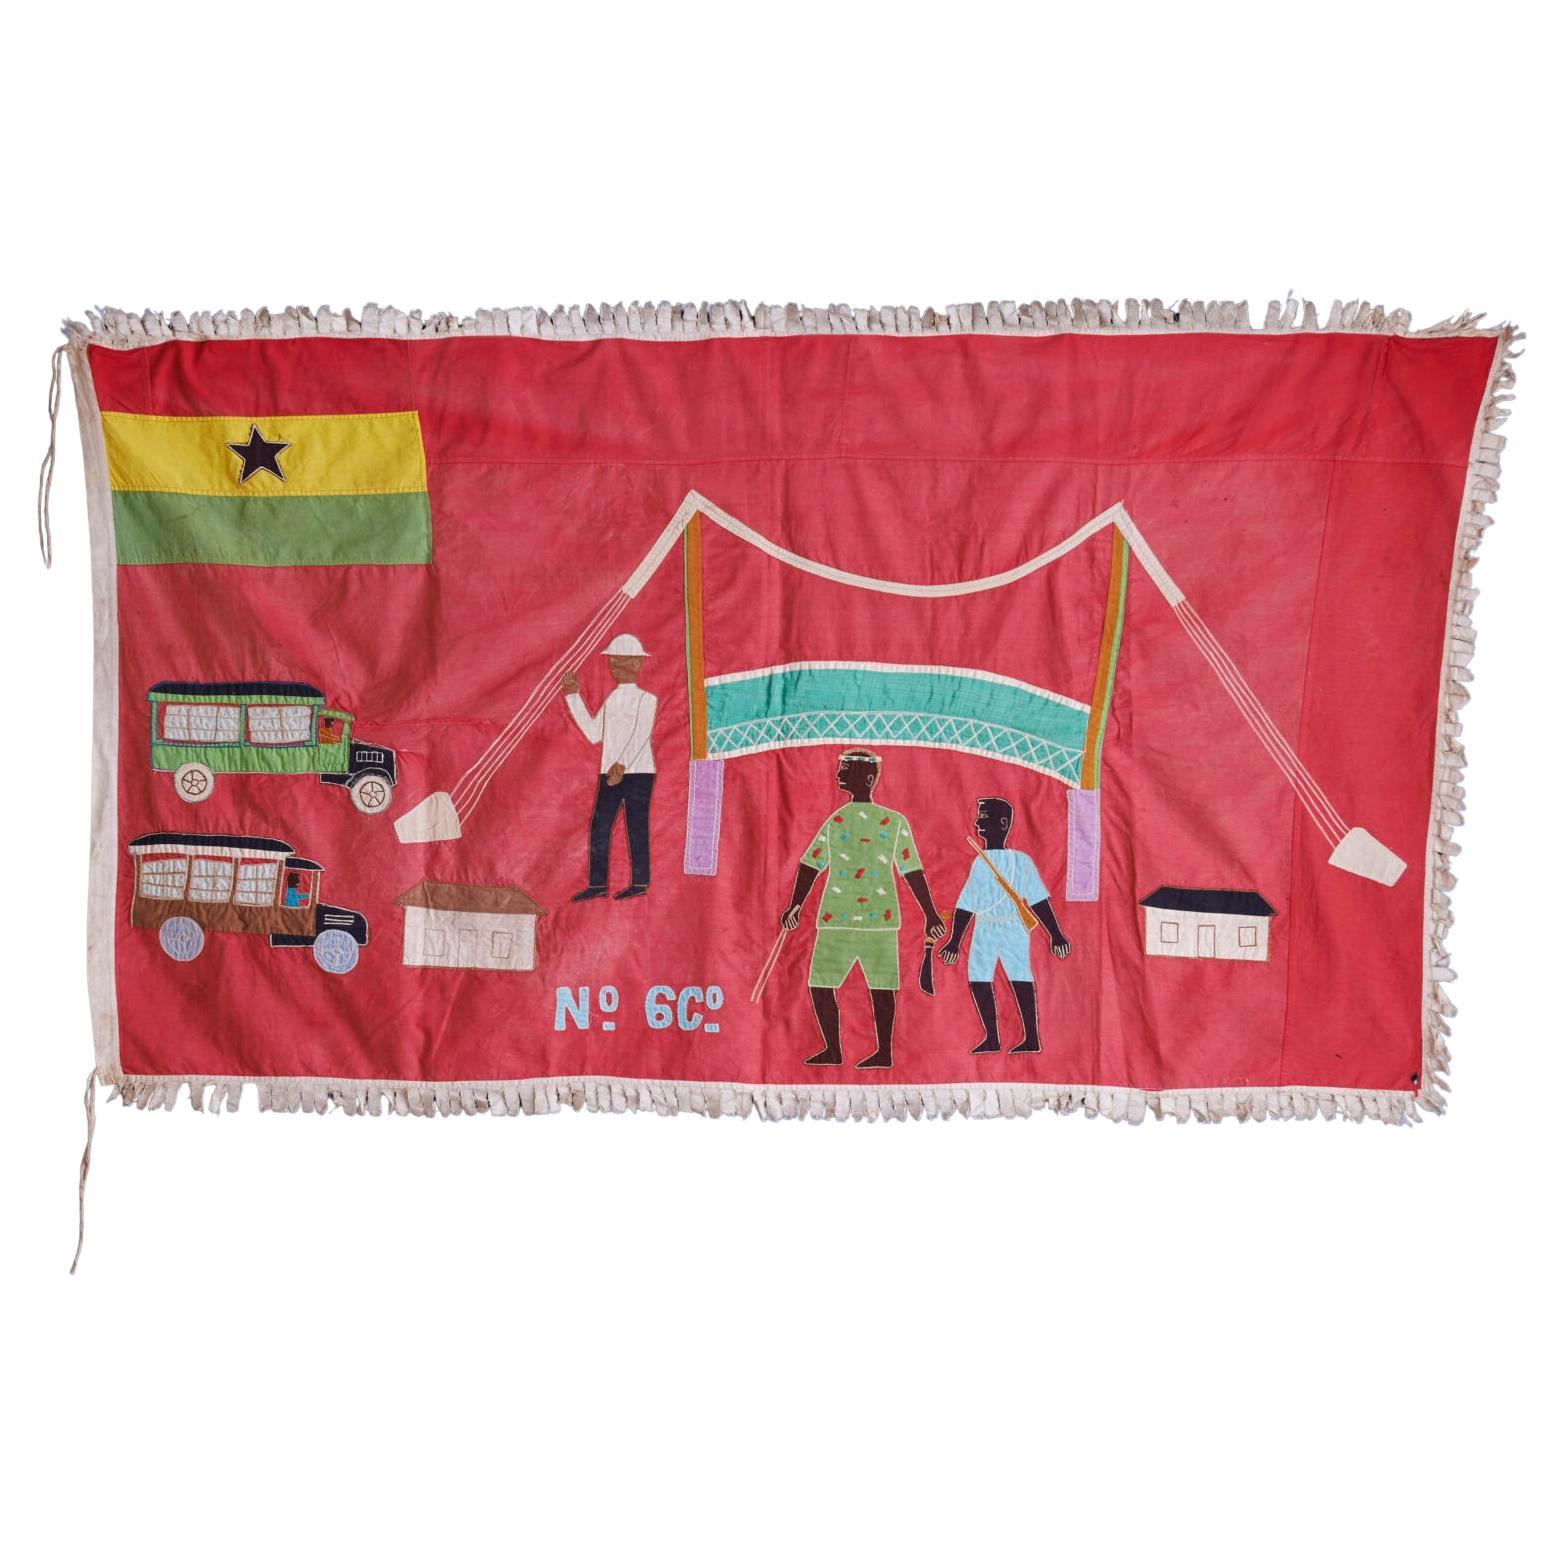 Vintage Asafo Flag in Pink Cotton Appliqué Pattern by Fante People, Ghana, 1960s